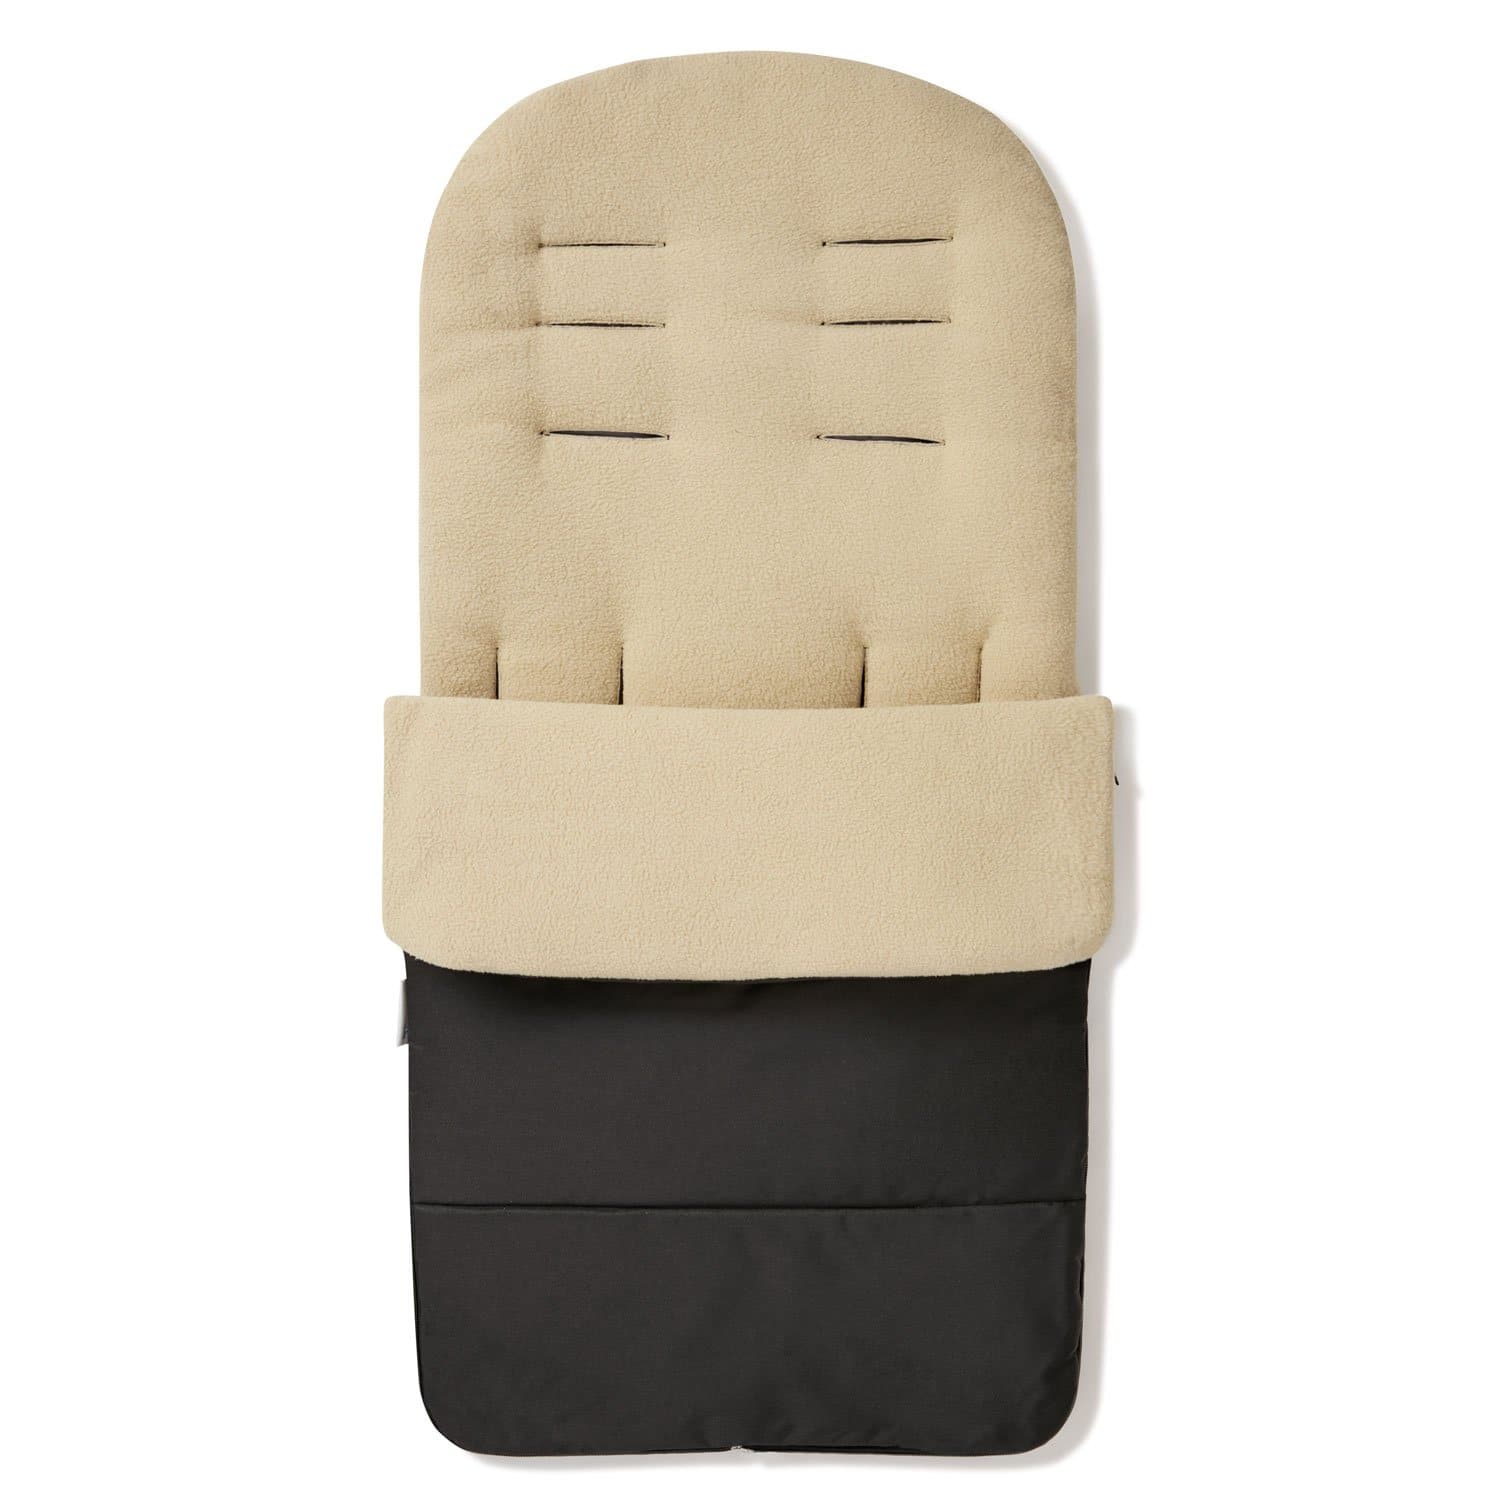 Premium Footmuff / Cosy Toes Compatible with Mothercare - Desert Sand / Fits All Models | For Your Little One